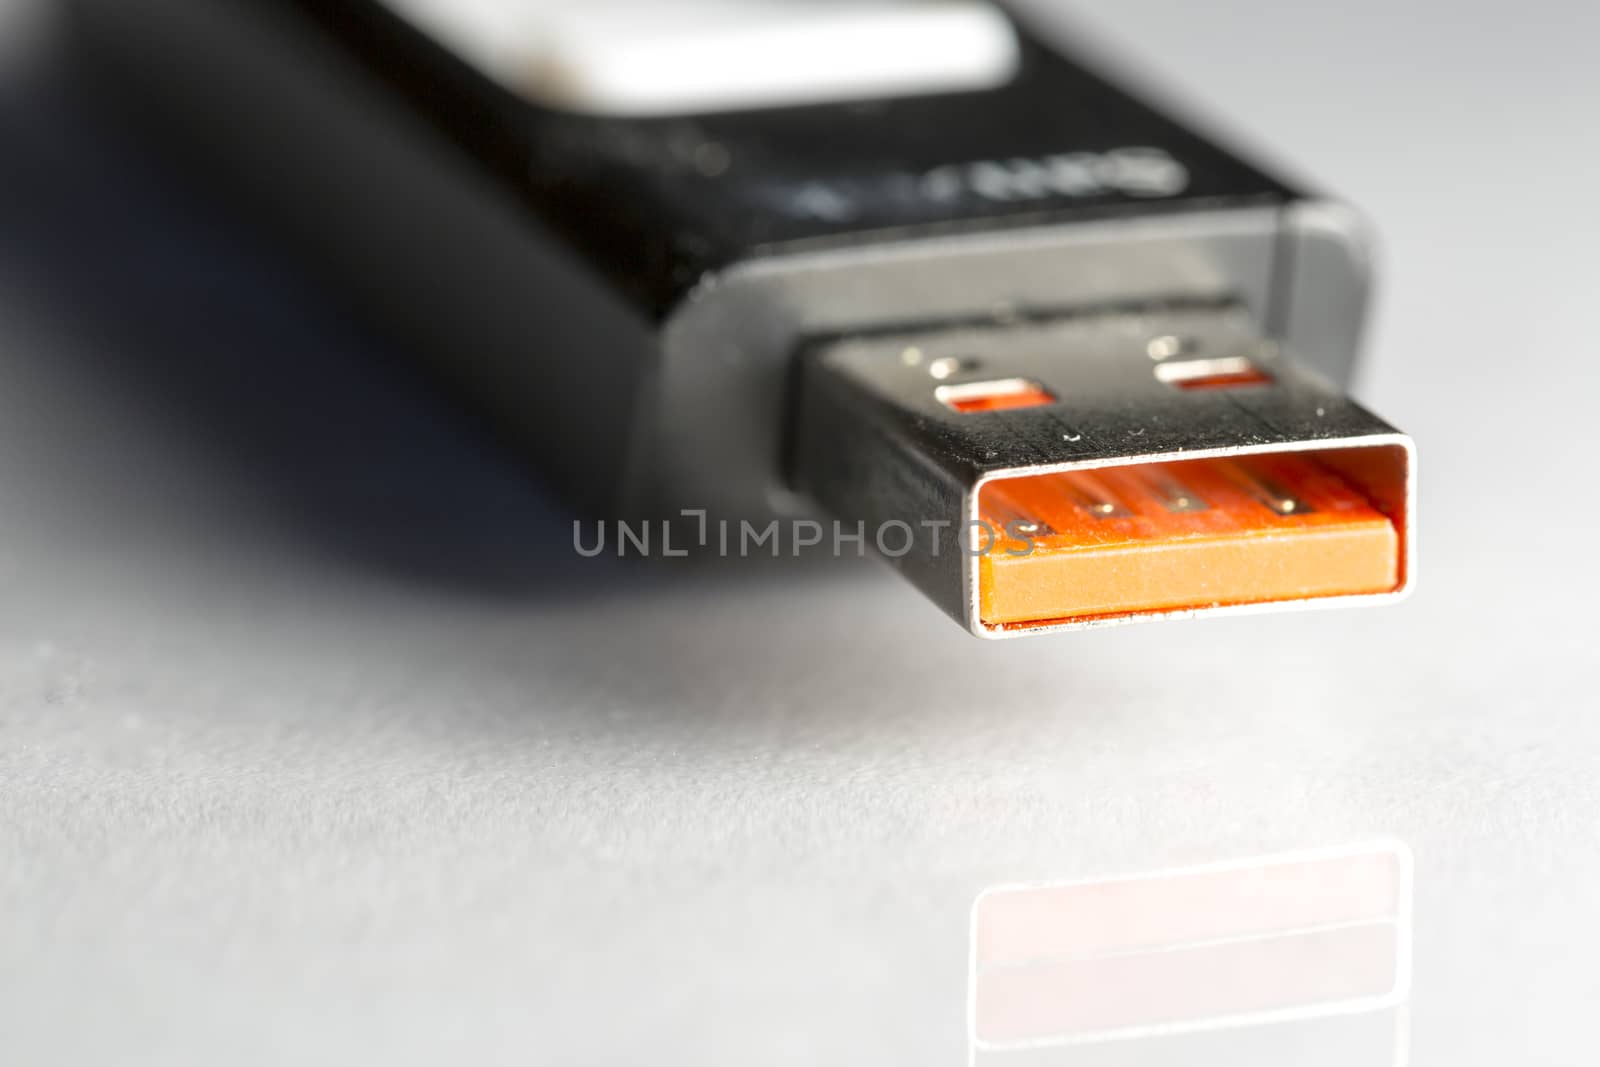 USB Flash Drive Close Up by Emmoth